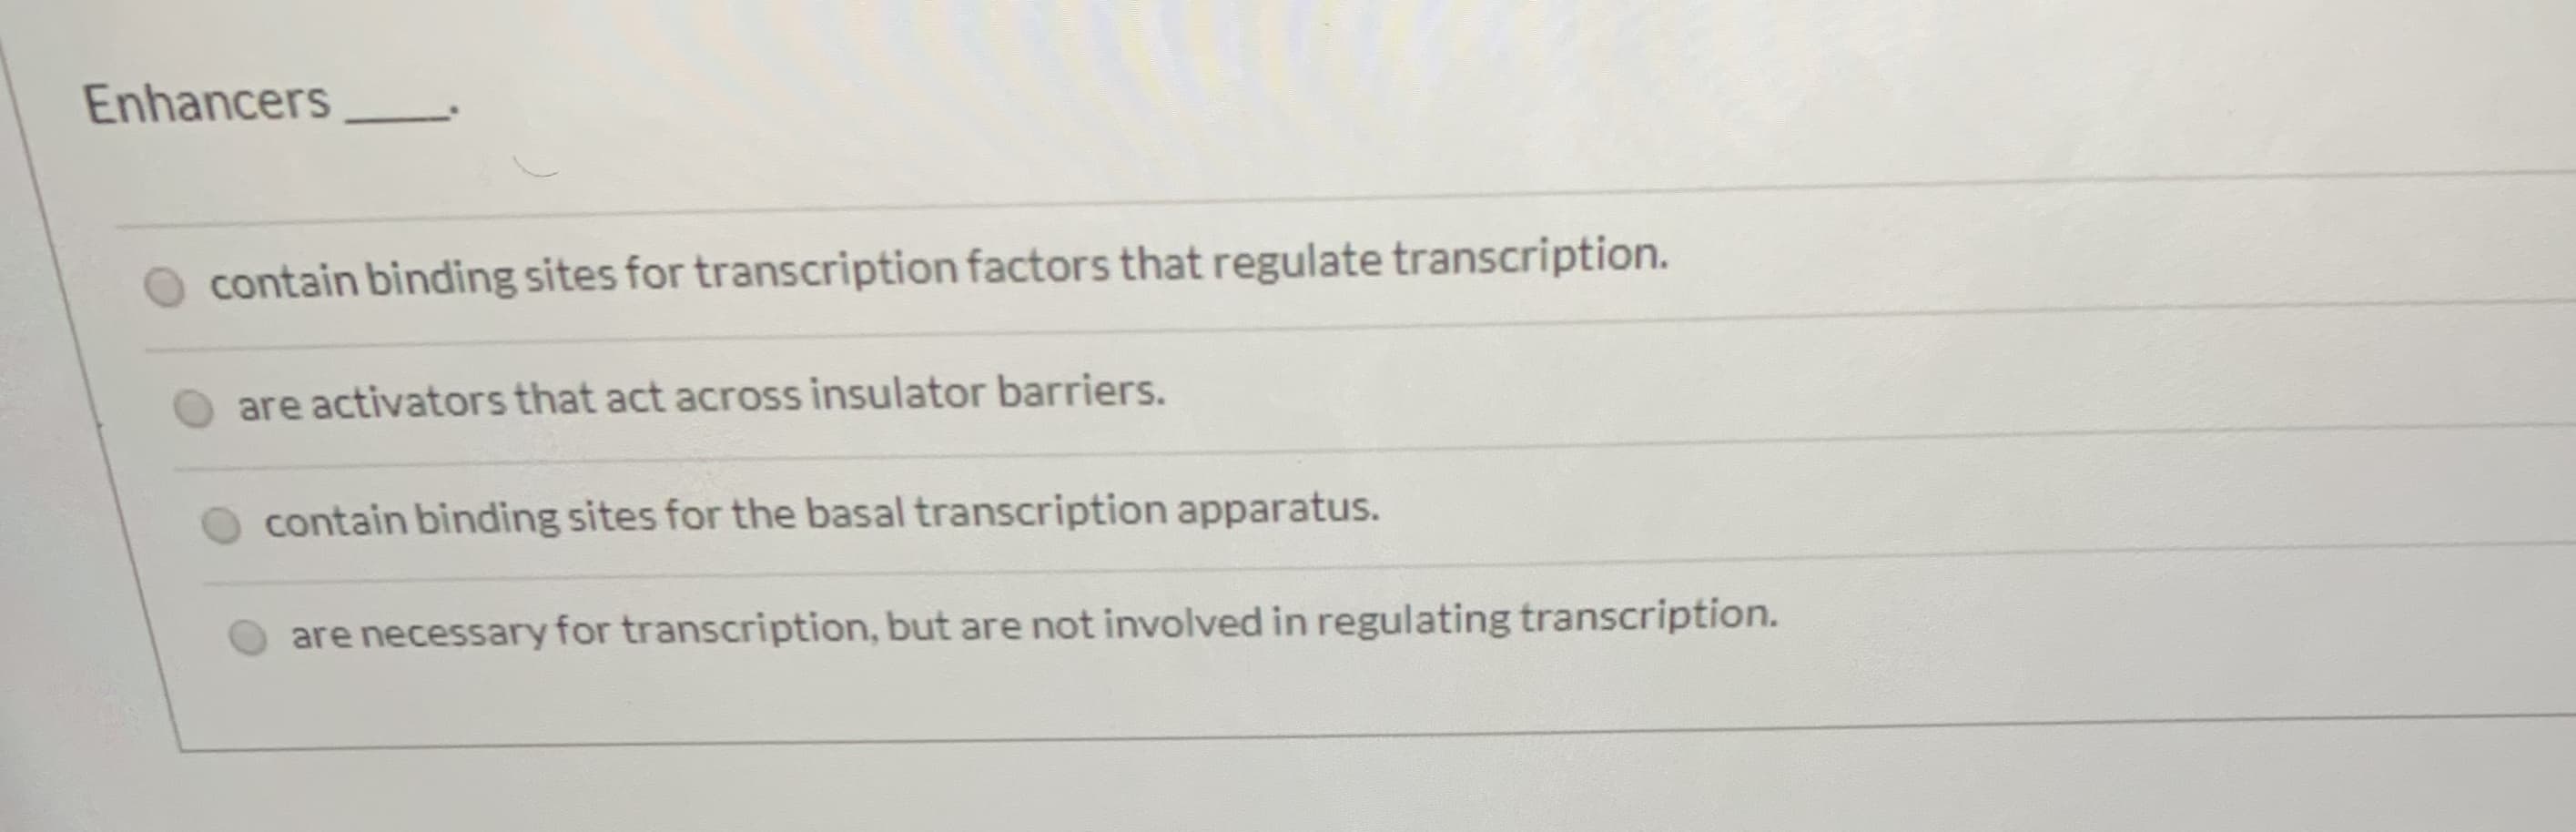 Enhancers
contain binding sites for transcription factors that regulate transcription.
are activators that act across insulator barriers.
contain binding sites for the basal transcription apparatus.
are necessary for transcription, but are not involved in regulating transcription.
